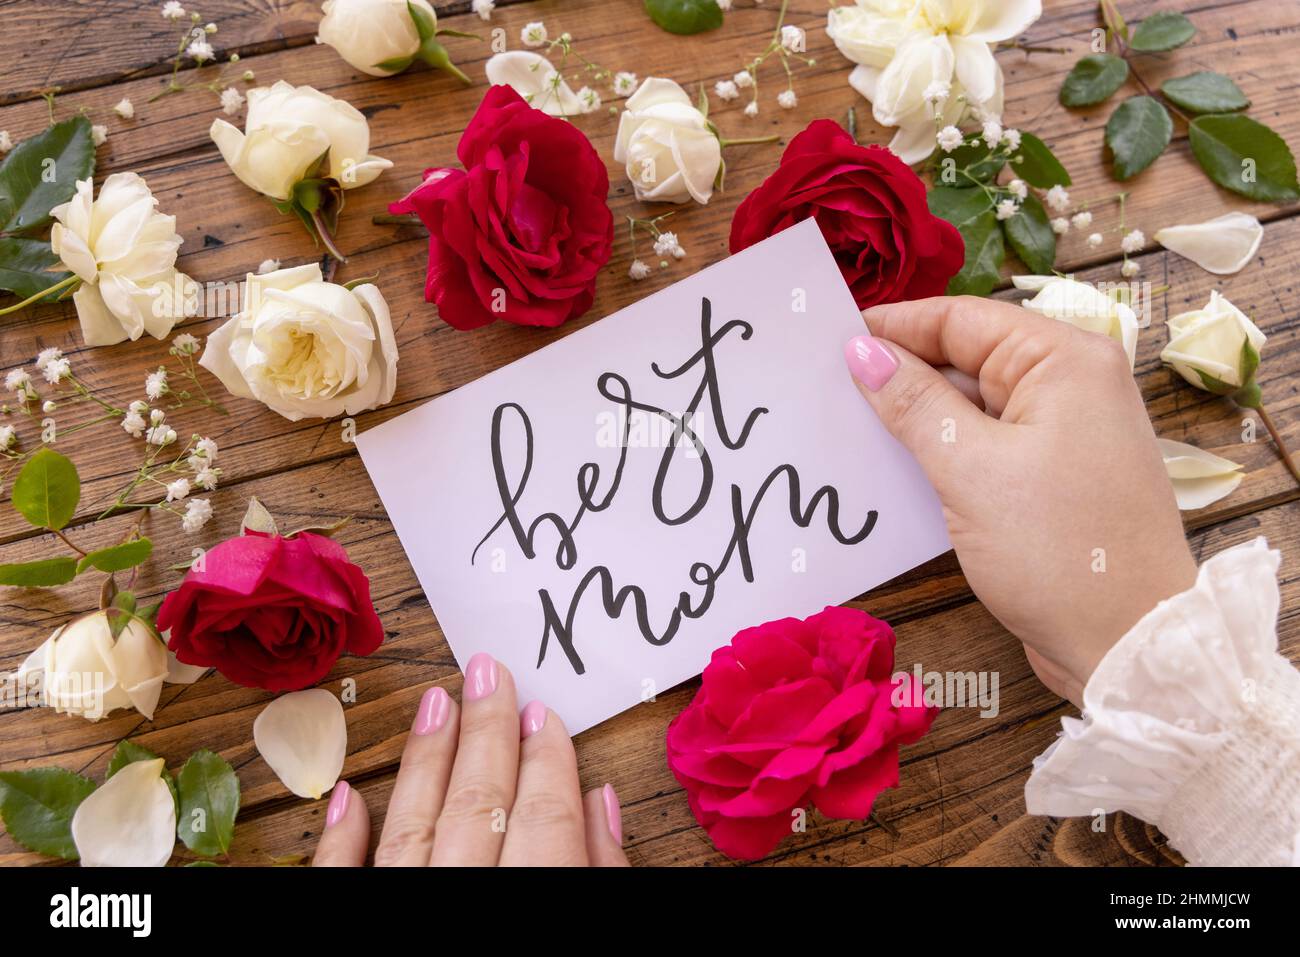 https://c8.alamy.com/comp/2HMMJCW/hands-with-handwritten-card-best-mom-surrounded-by-red-and-cream-roses-close-up-on-a-wooden-table-femminine-romantic-declaration-of-love-near-flowers-2HMMJCW.jpg